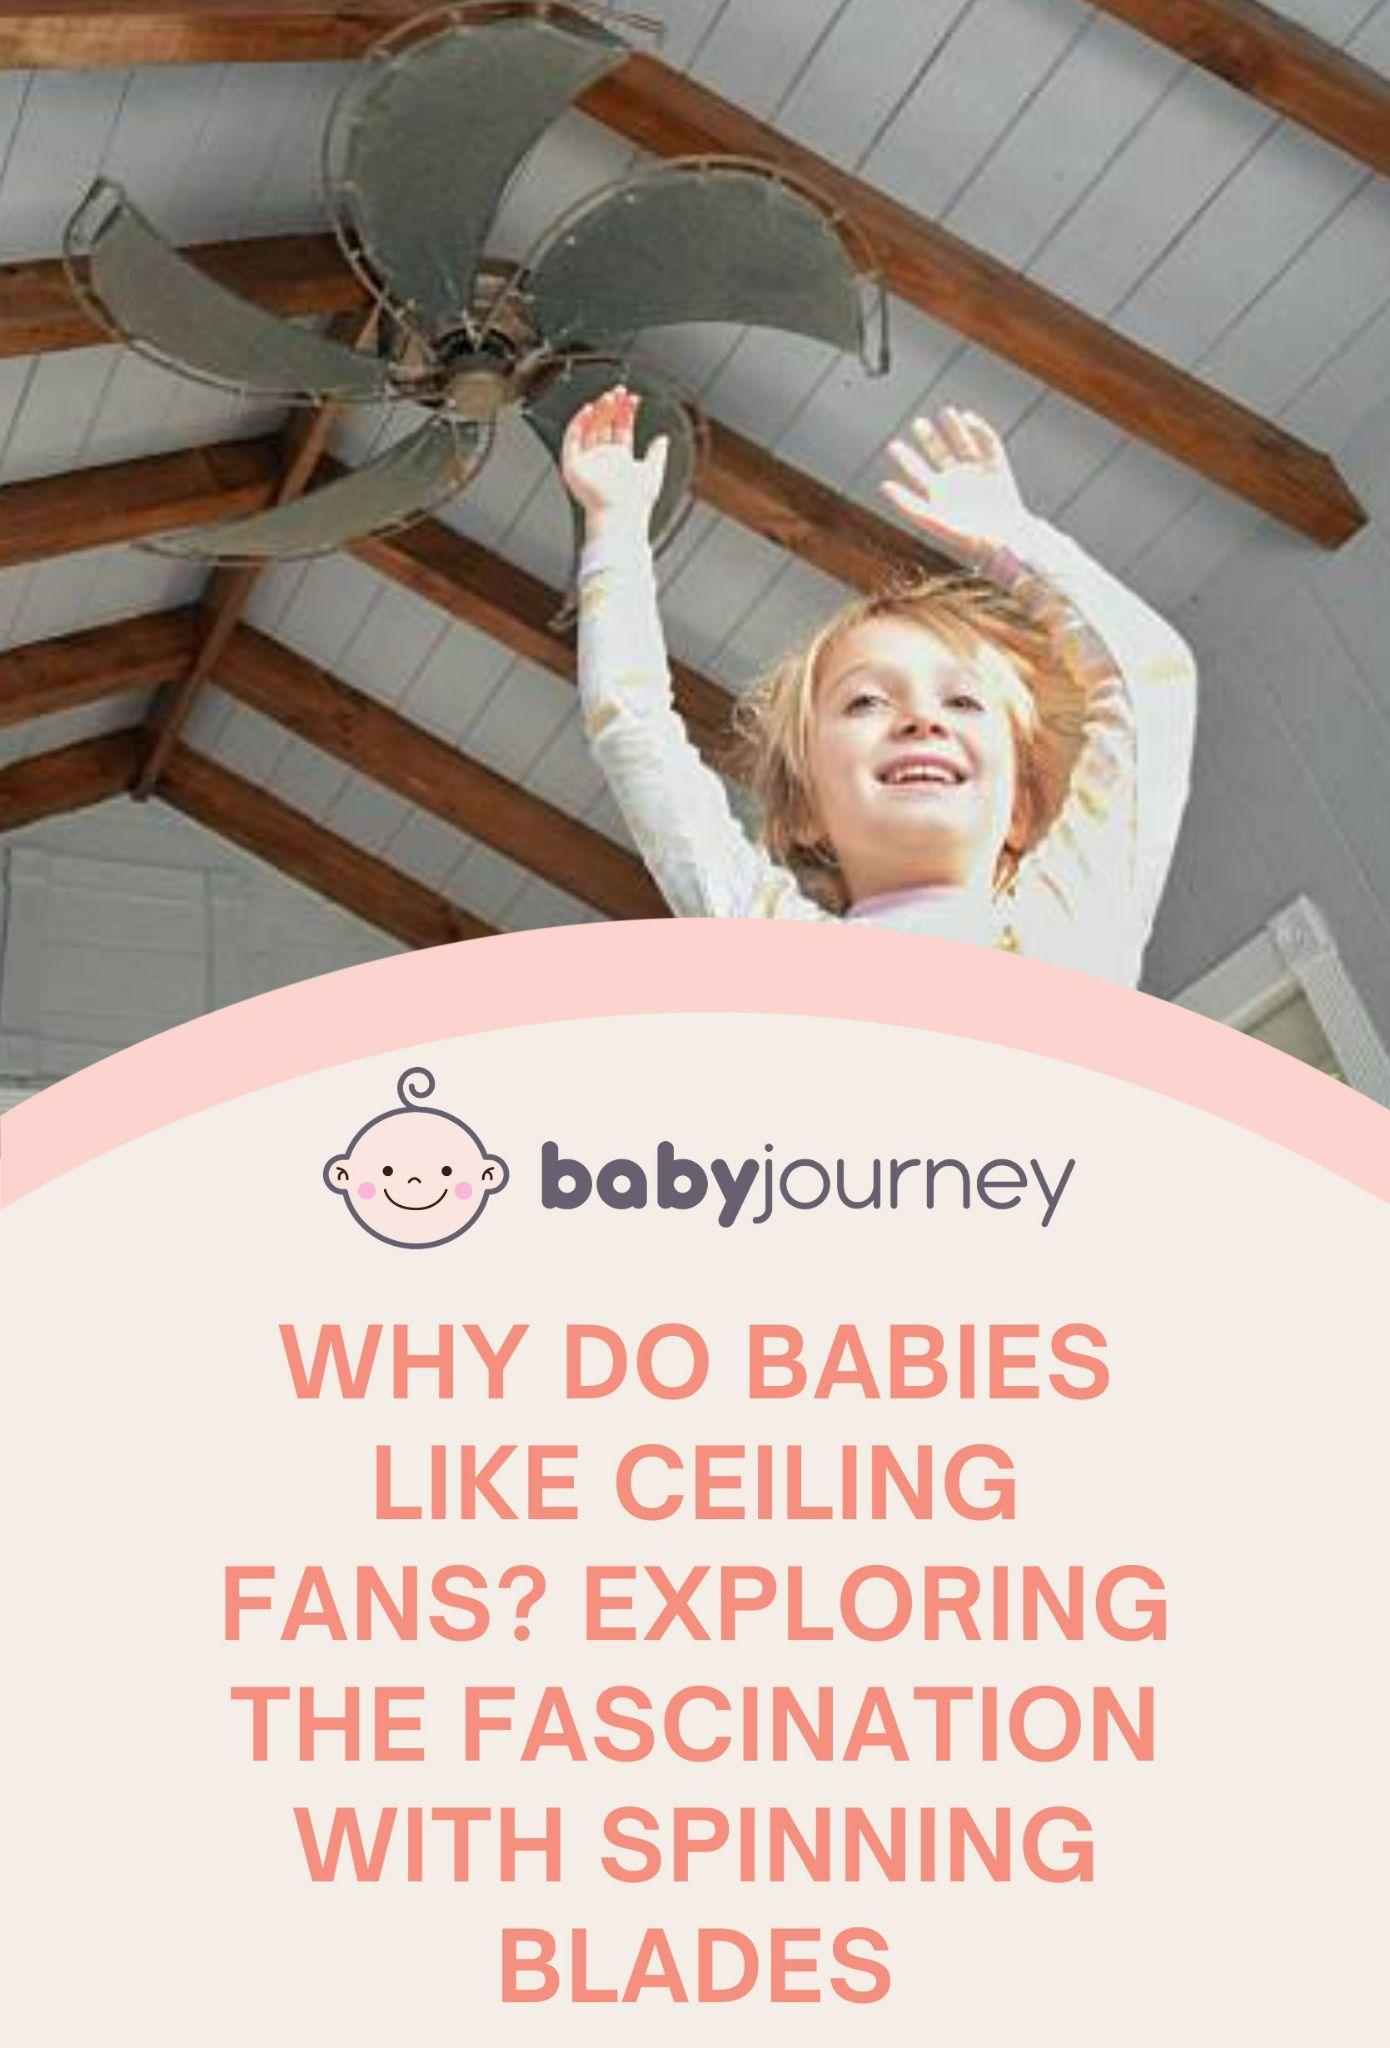 Why Do Babies Like Ceiling Fans? Exploring the Fascination with Spinning Blades Pinterest Image - Baby Journey